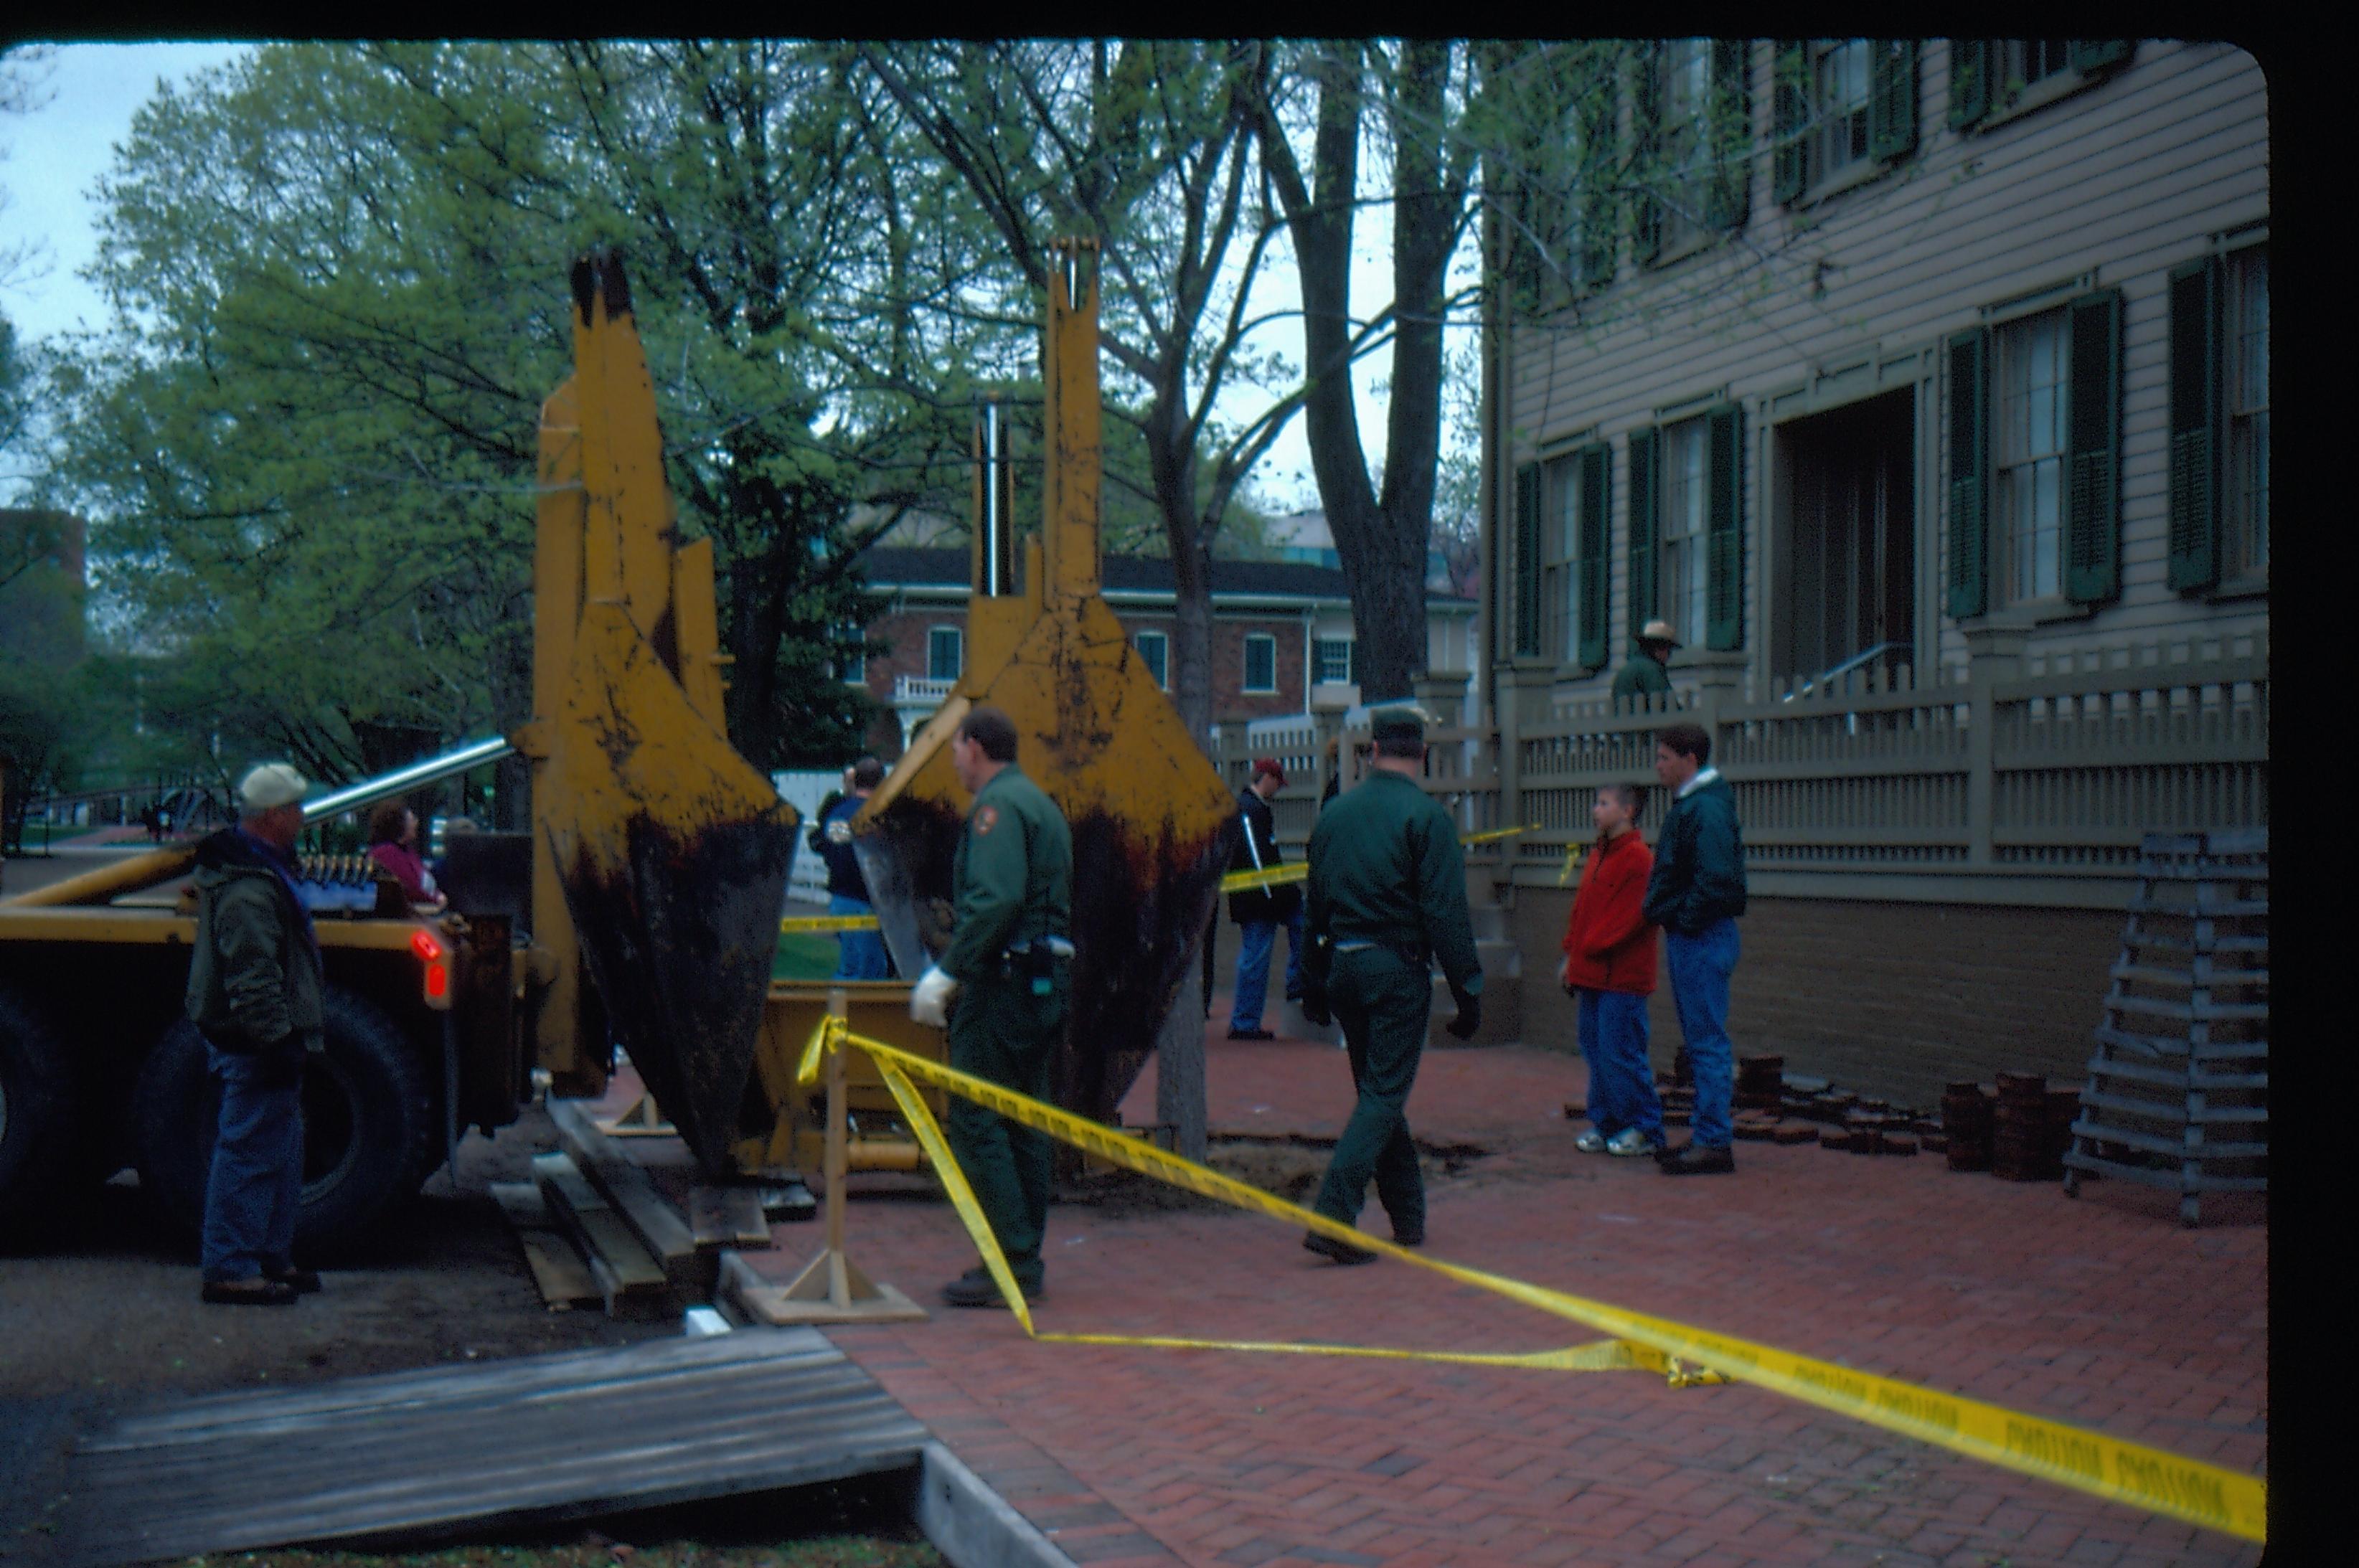 Elm tree removal - Pleasant Nursery staff beginning removal while City Arborist Mike Dirksen and son observe on right.  Maintenance workers Bob Trenter and Vee Pollack assist the crew.  Visitors start a tour of the Lincoln Home behind the equipment with Ranger ?. Conference Center in far background center. Looking Northeast from 8th and Jackson Street intersection Elm tree, Lincoln Home, brick plaza, Pleasant Nursery, staff, Arborist, visitors